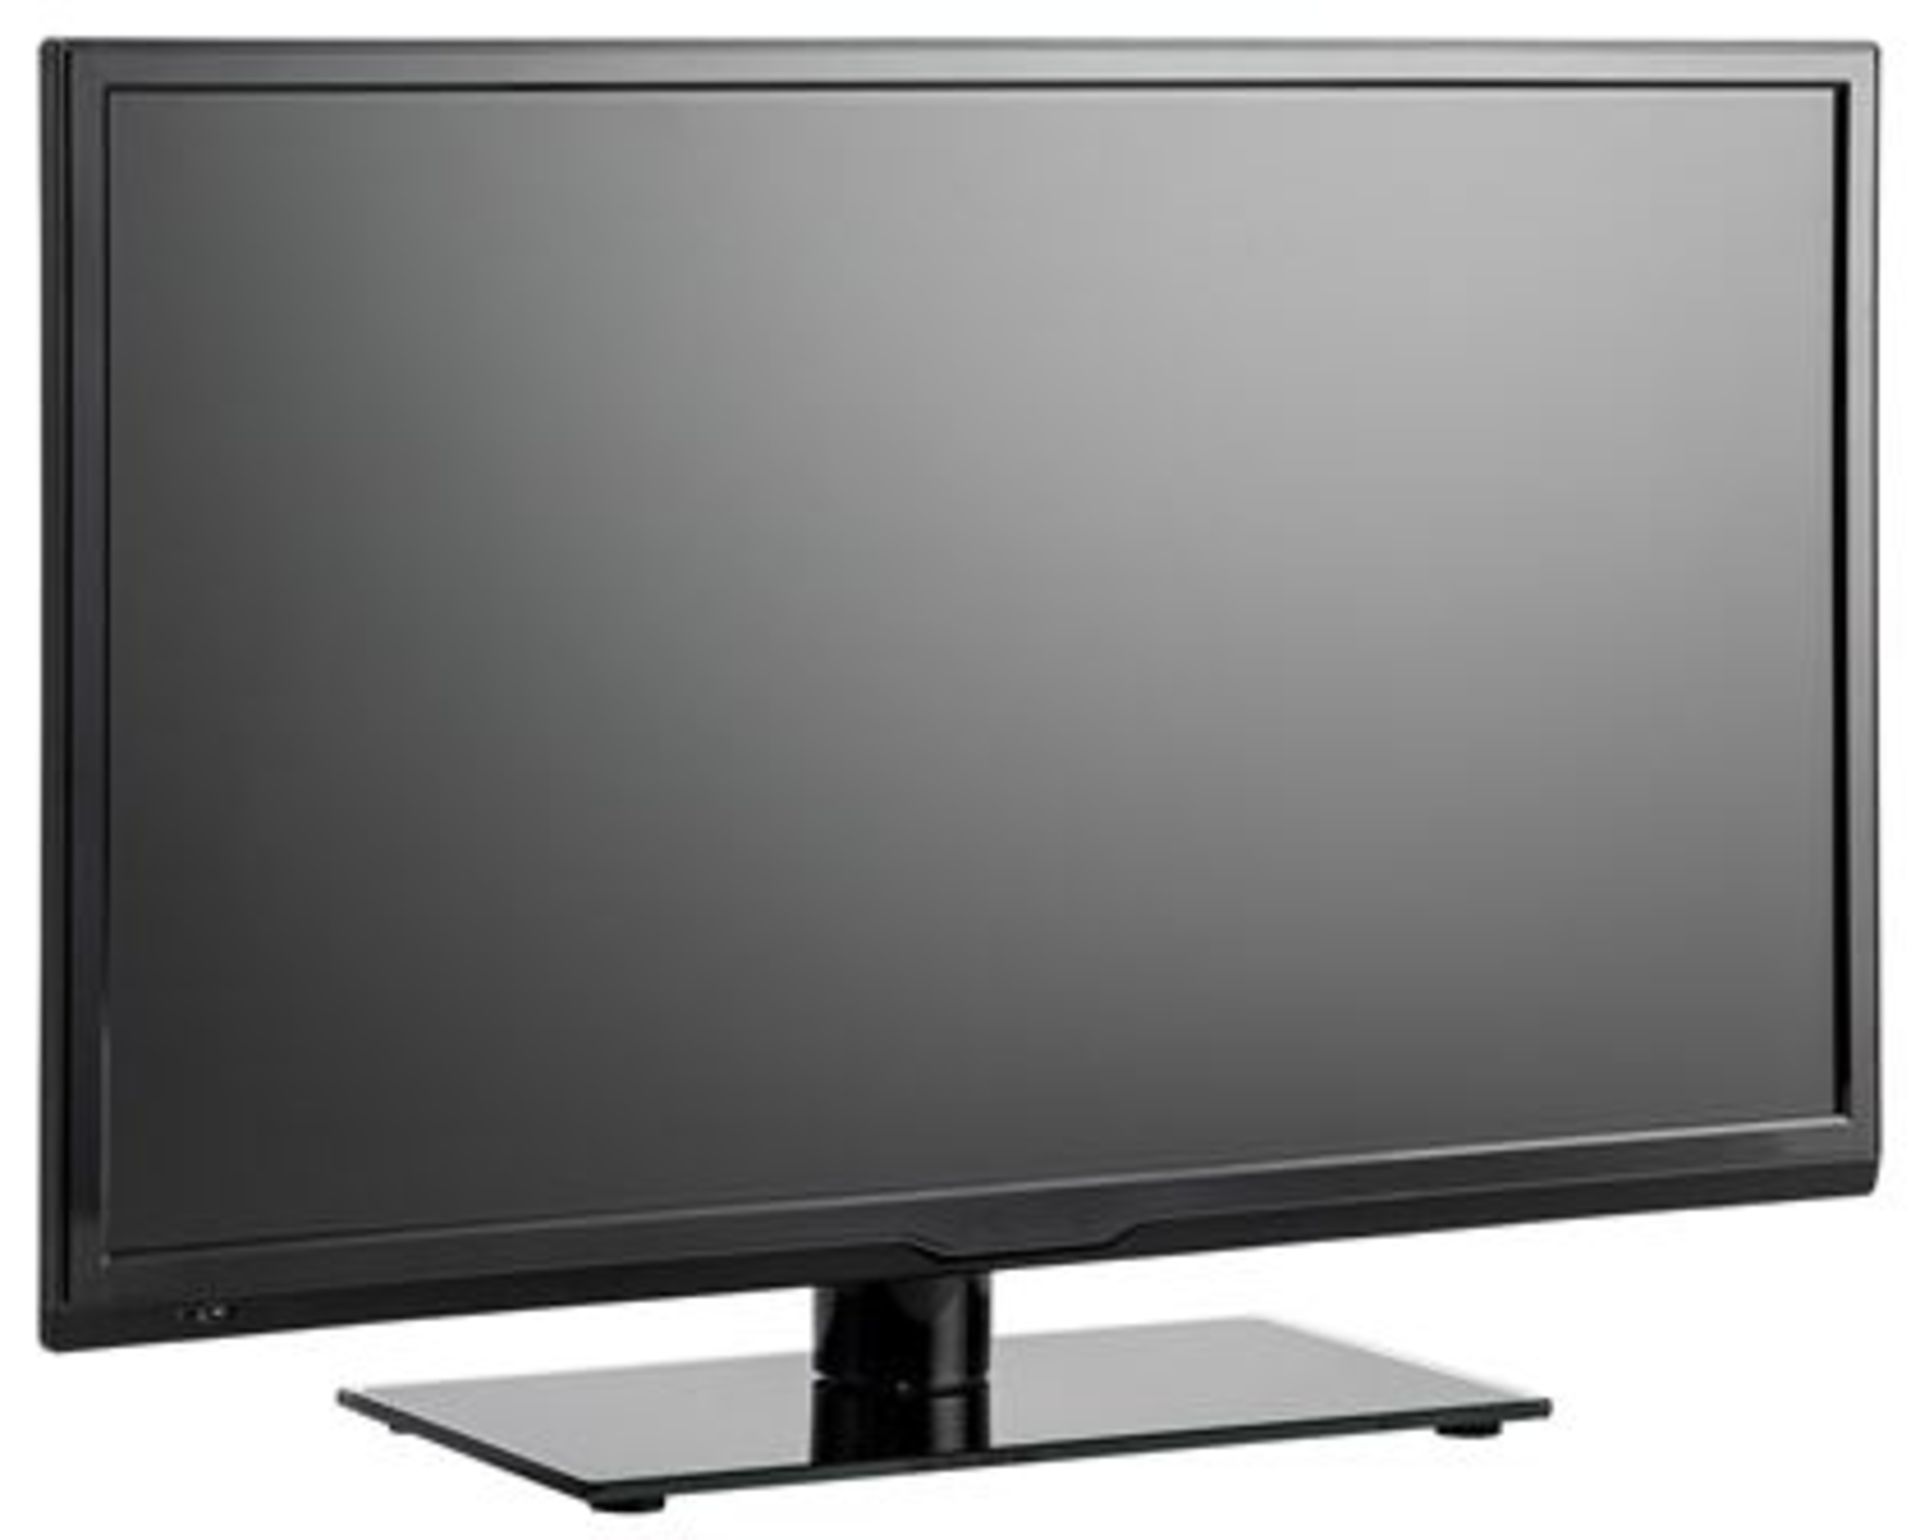 Ex display reboxed - Our House branded 26" Full HD DVD LED TV with USB Media and PVR Function